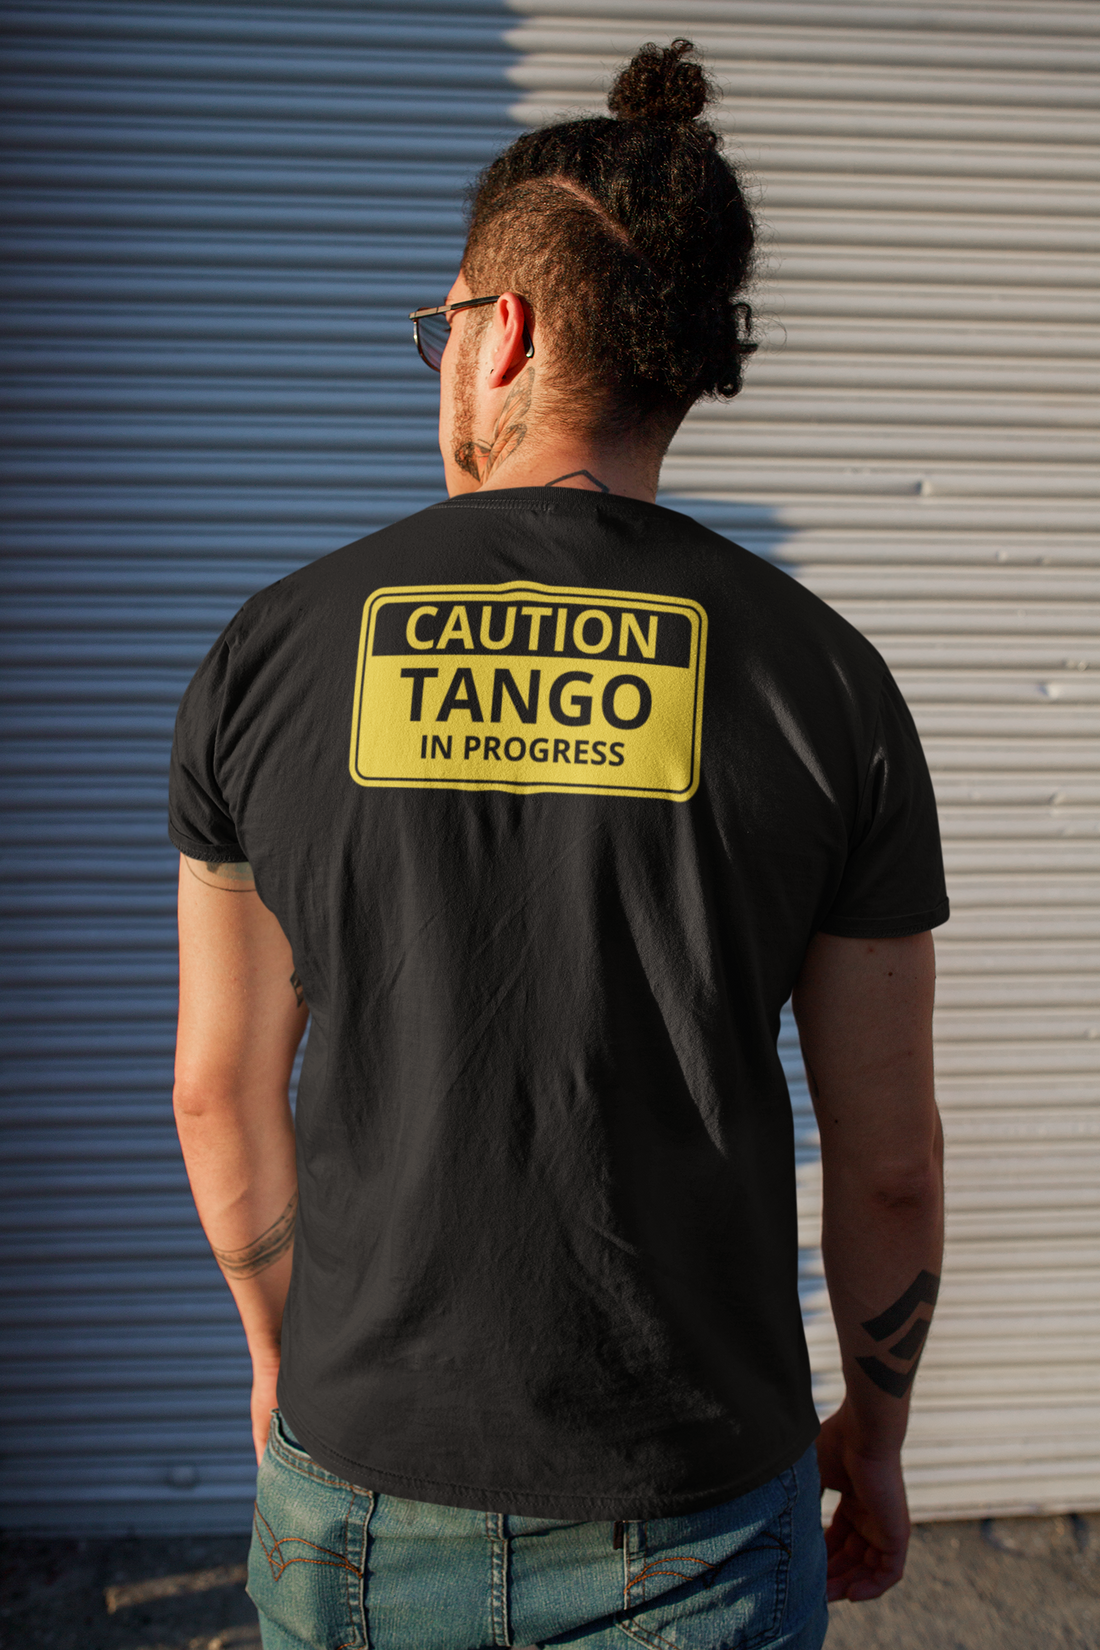 A male wearing a black T-shirt with the text "Caution, Tango in Progress" on top of a yellow and black warning sign